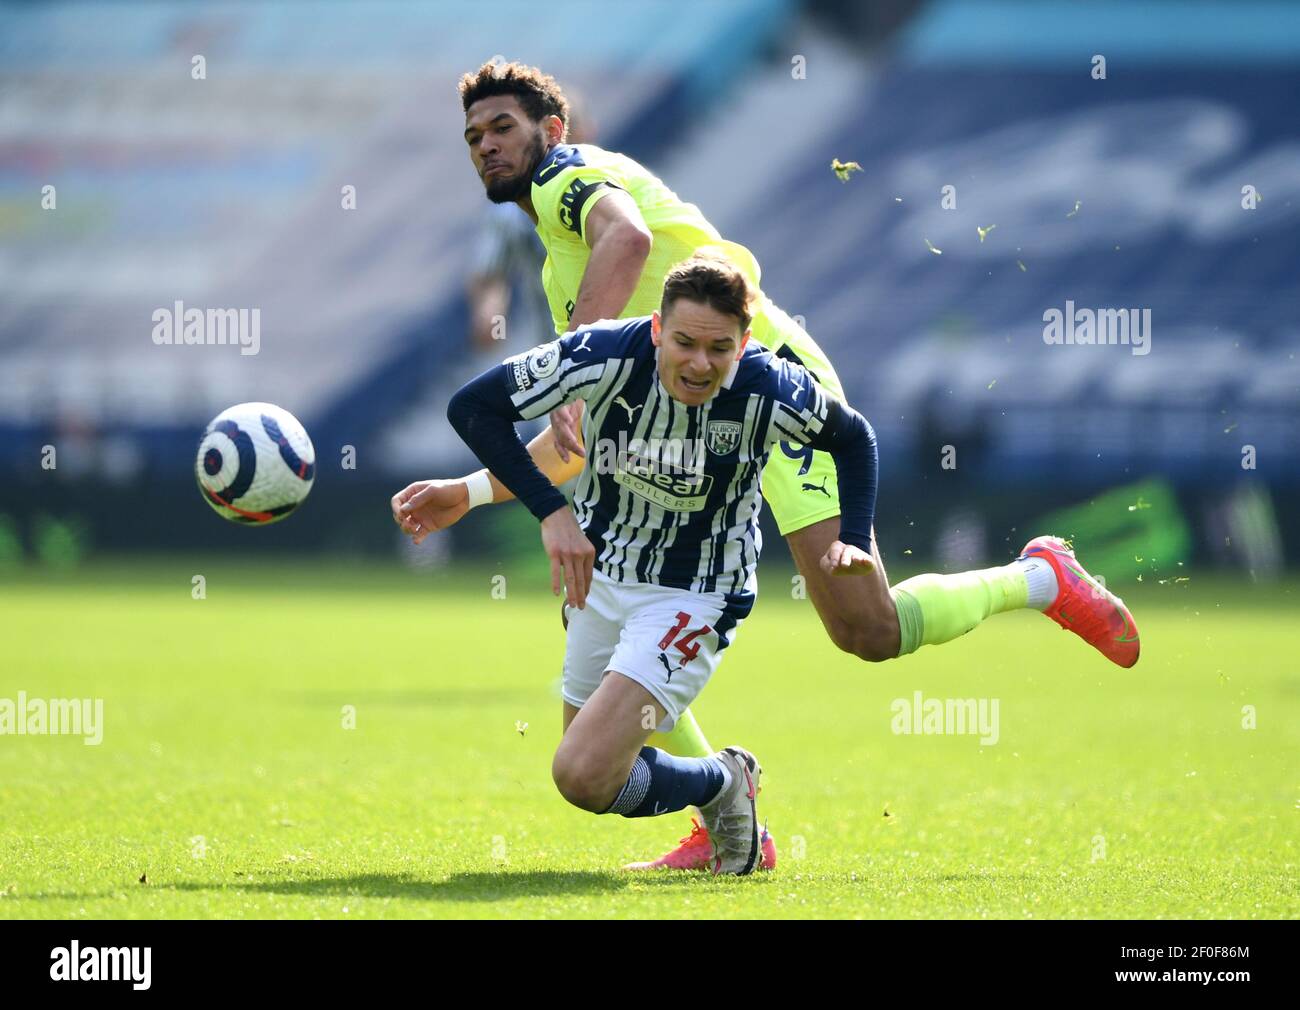 West Bromwich Albion's Conor Townsend collides with Newcastle United's Joelinton during the Premier League match at The Hawthorns, West Bromwich. Picture date: Sunday March 7, 2021. Stock Photo